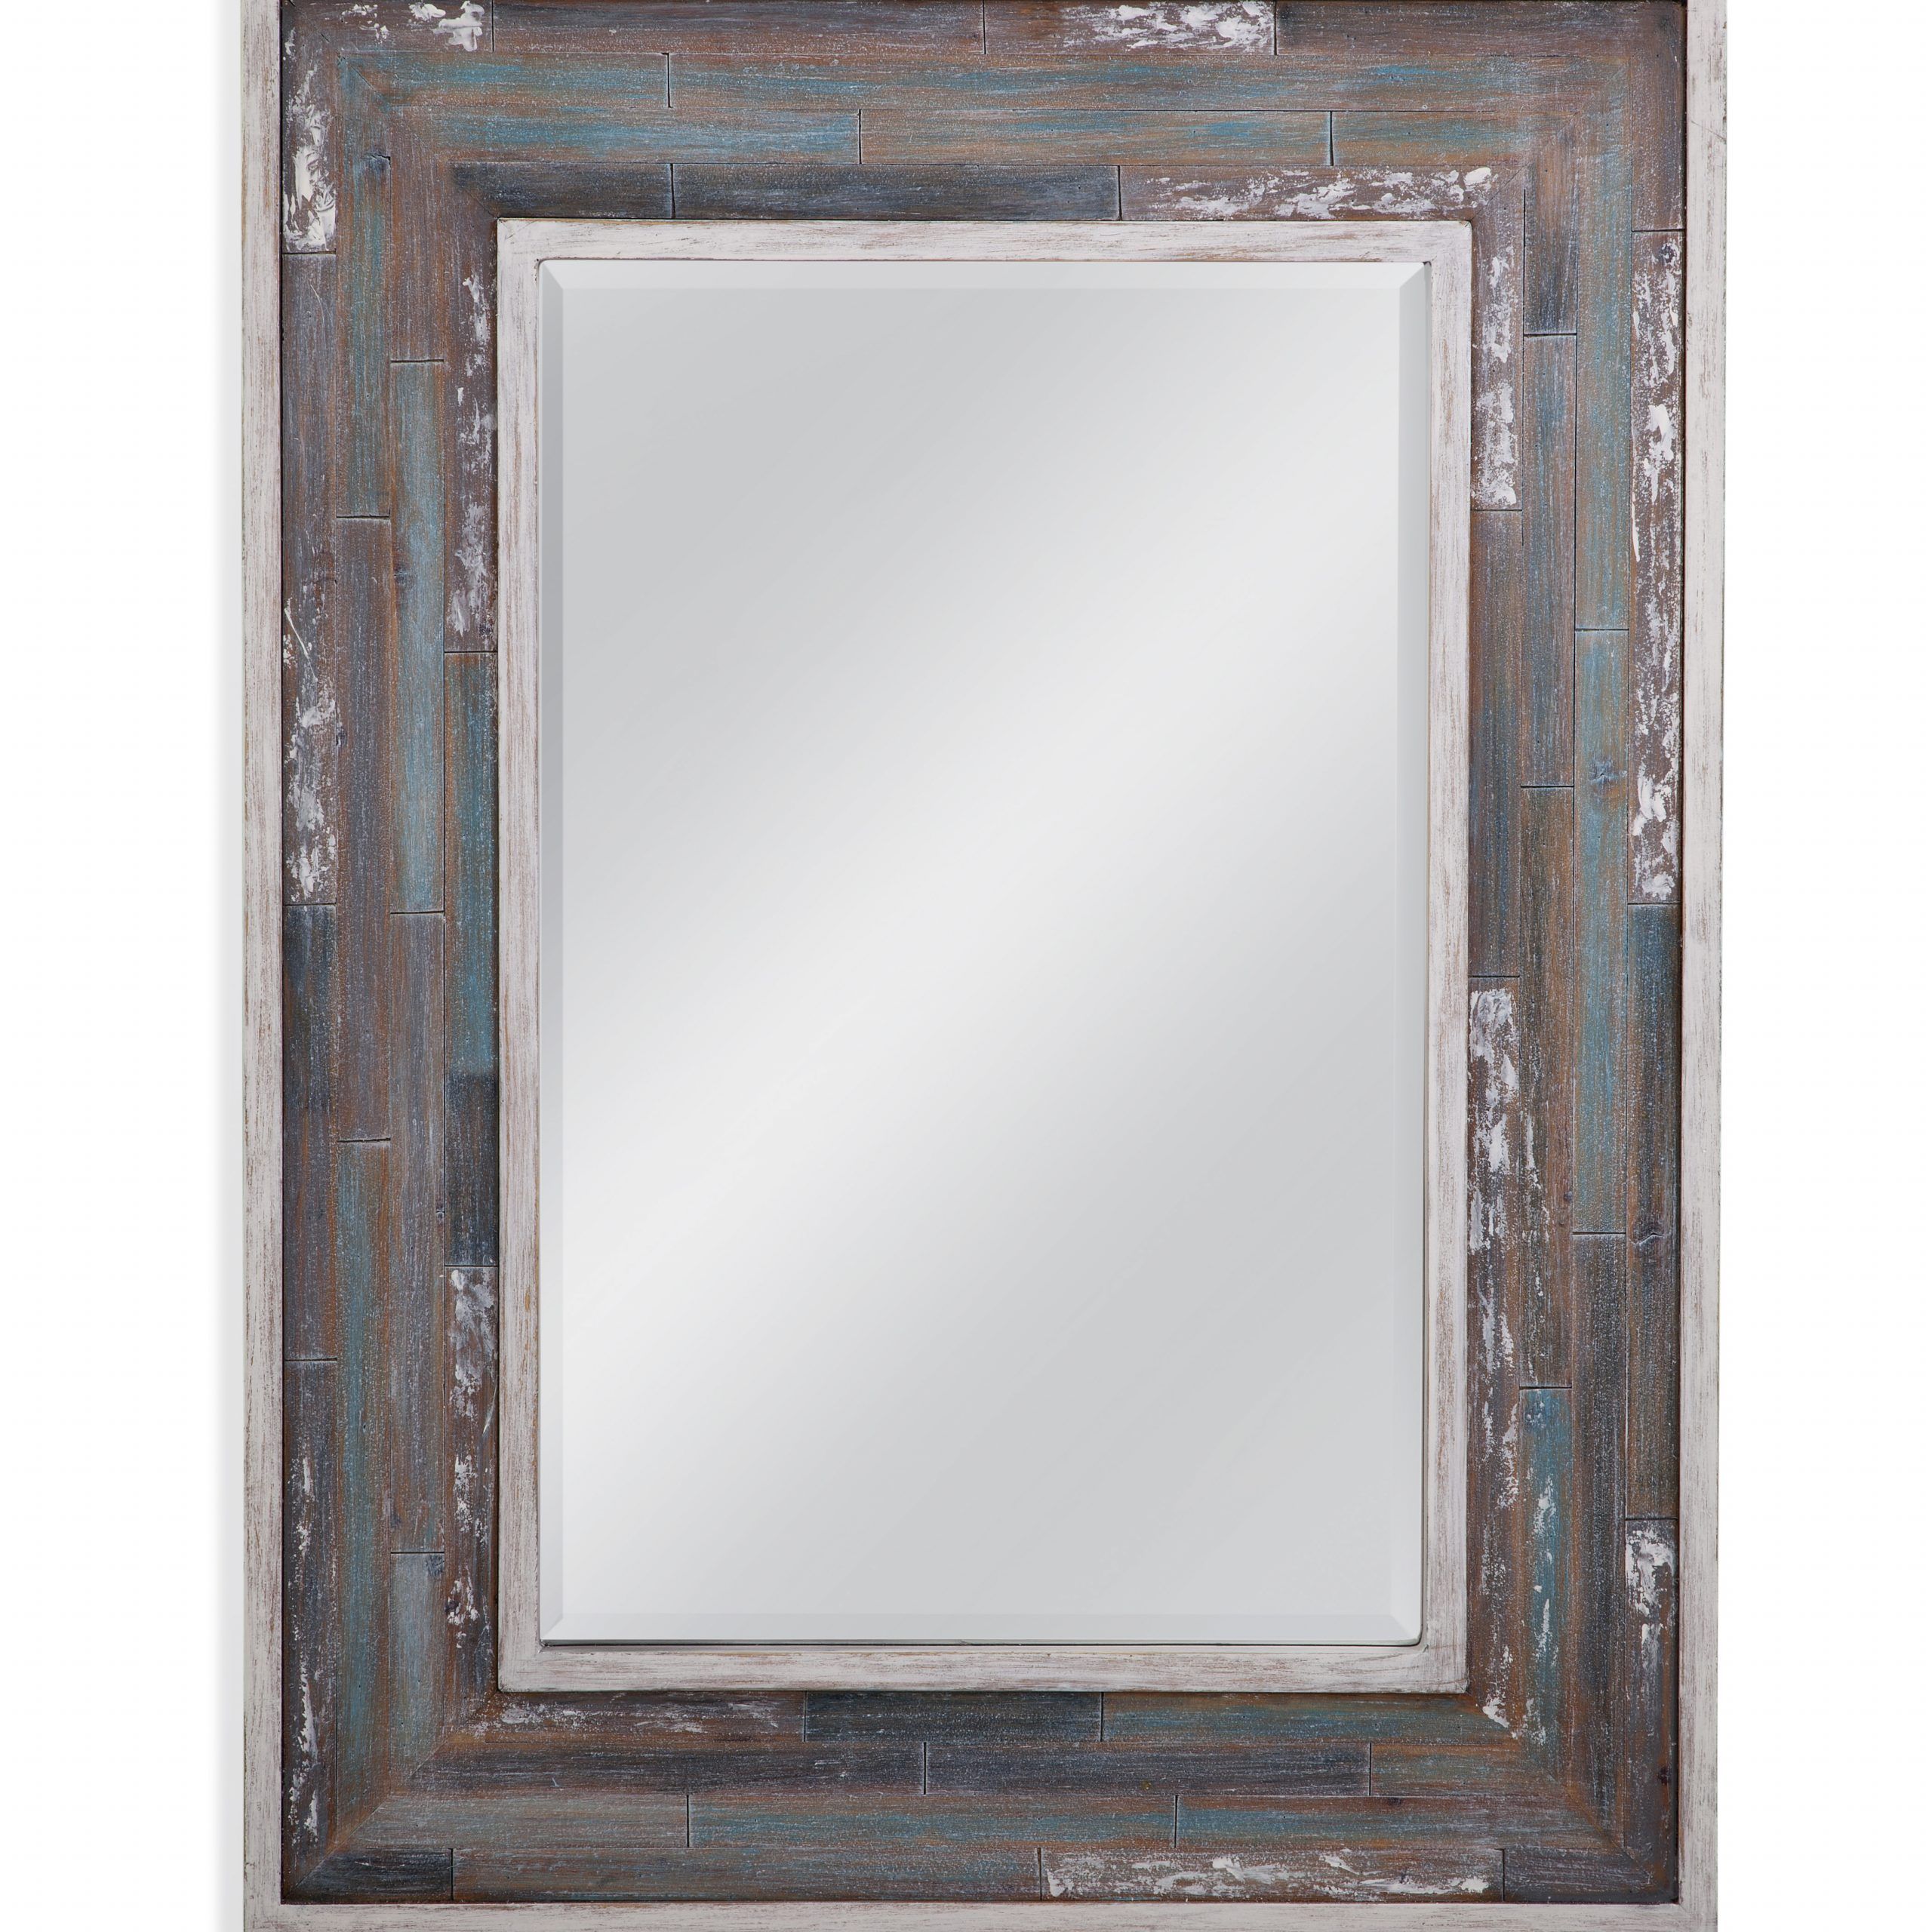 Bassett Mirror Taft Wall Mirror In Antique Silver/Gold Leaf Finish Pertaining To Glam Silver Leaf Beaded Wall Mirrors (View 3 of 15)